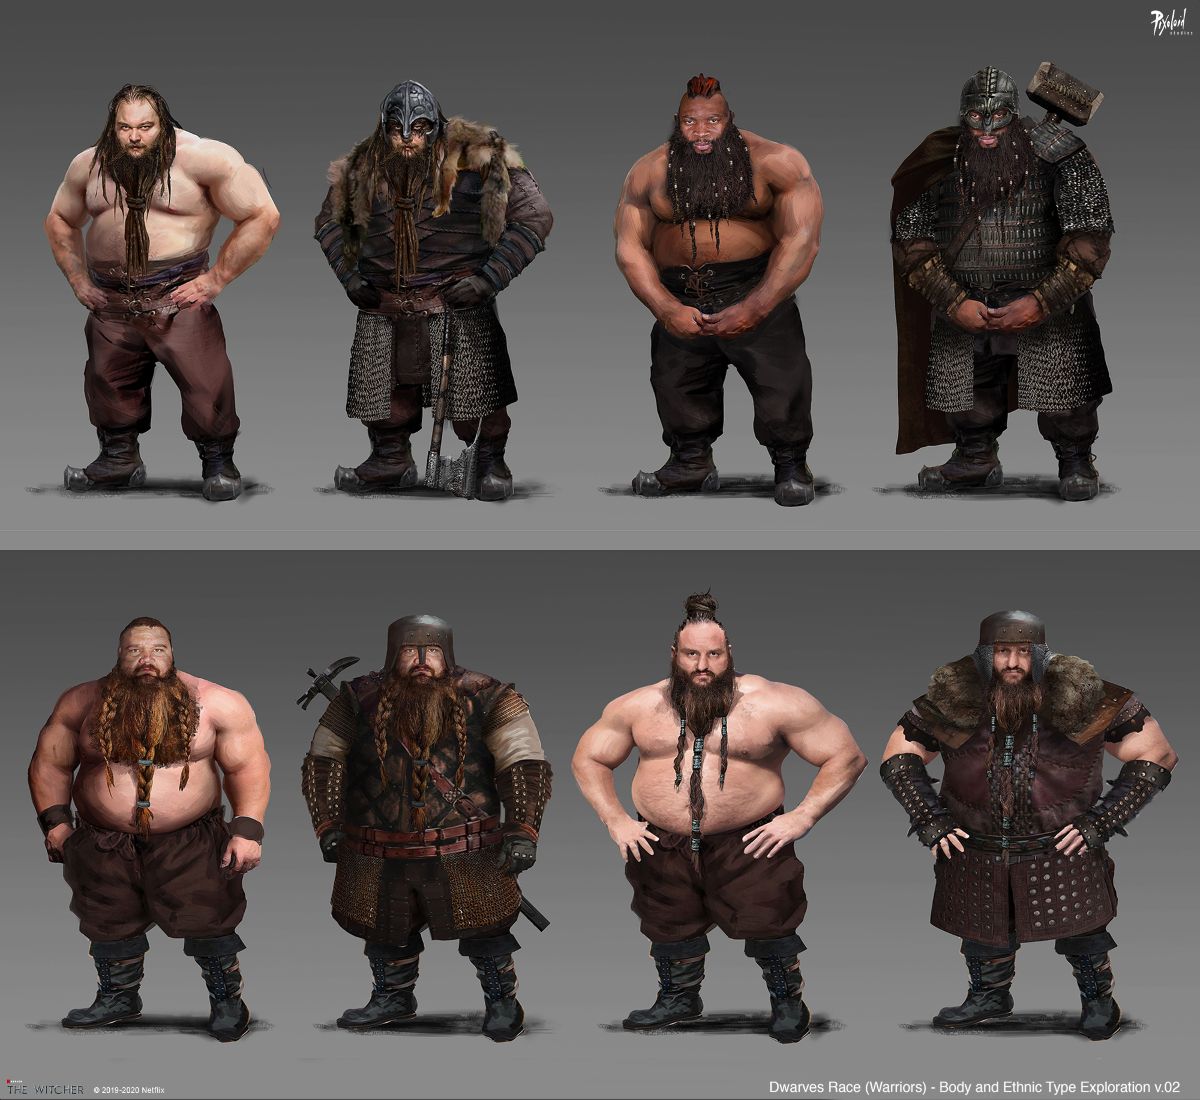 Concept art of dwarves by Pixoloid for The Witcher series on Netflix